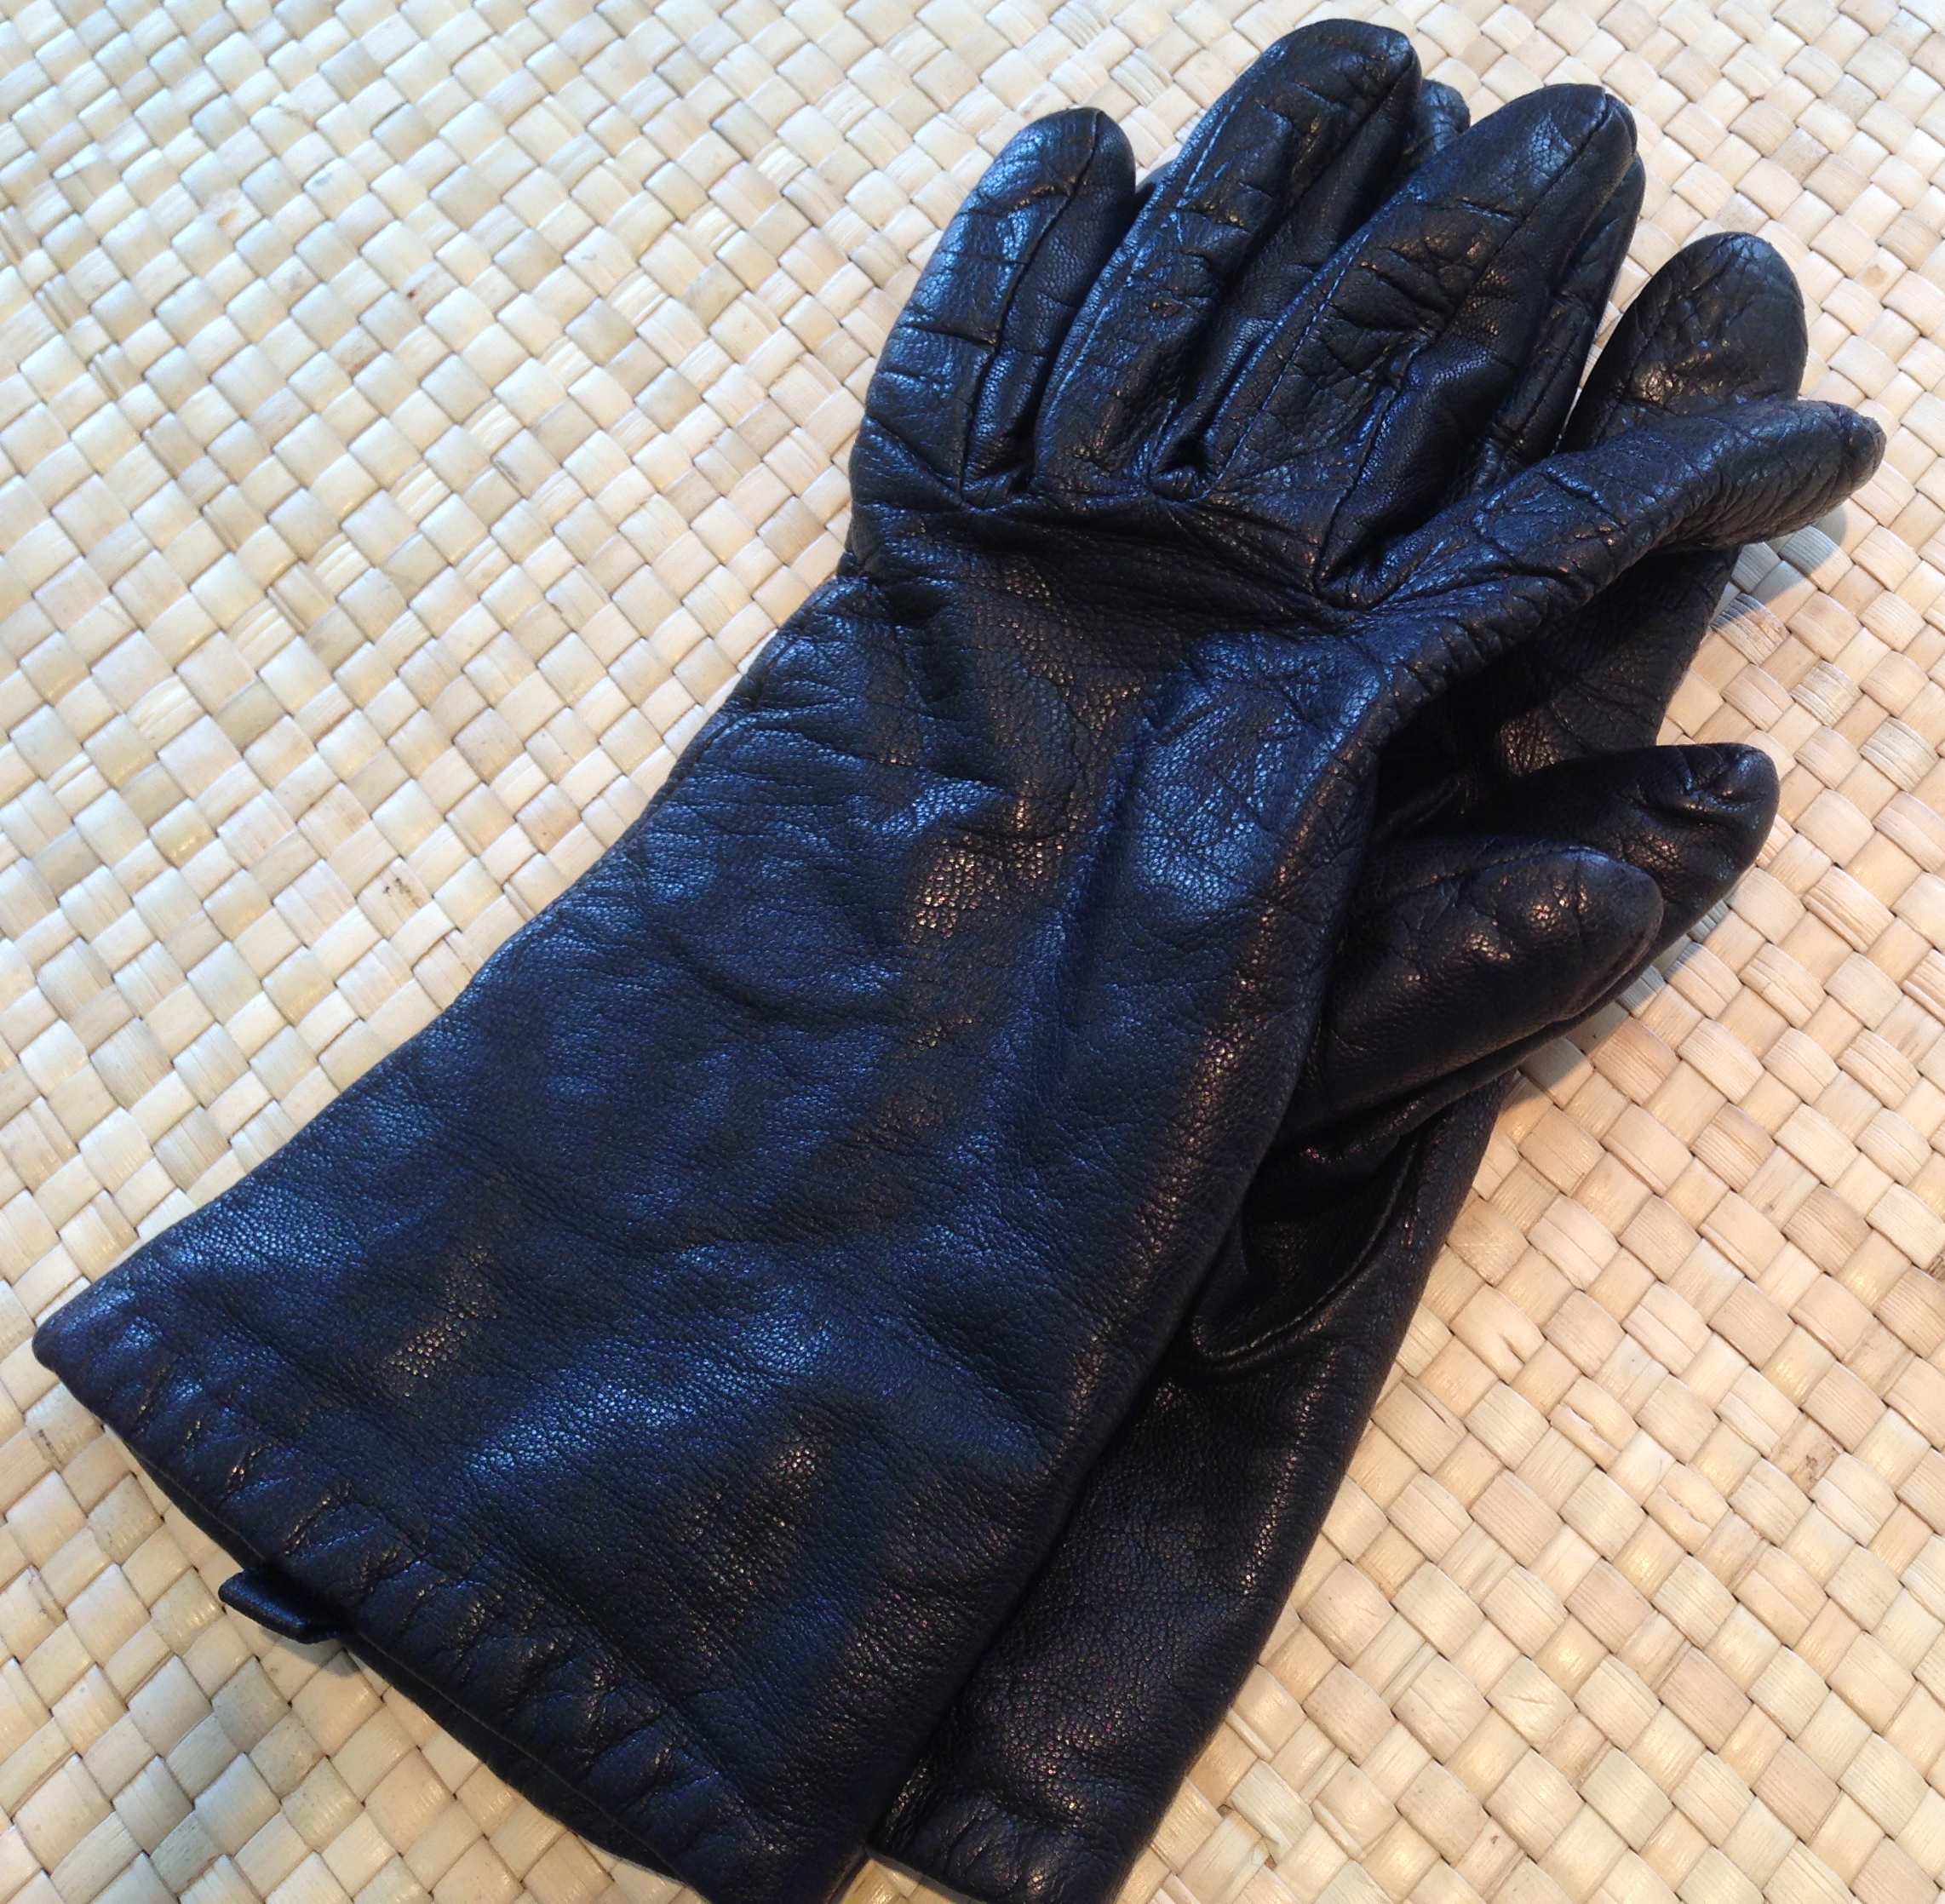 Old leather gloves photo